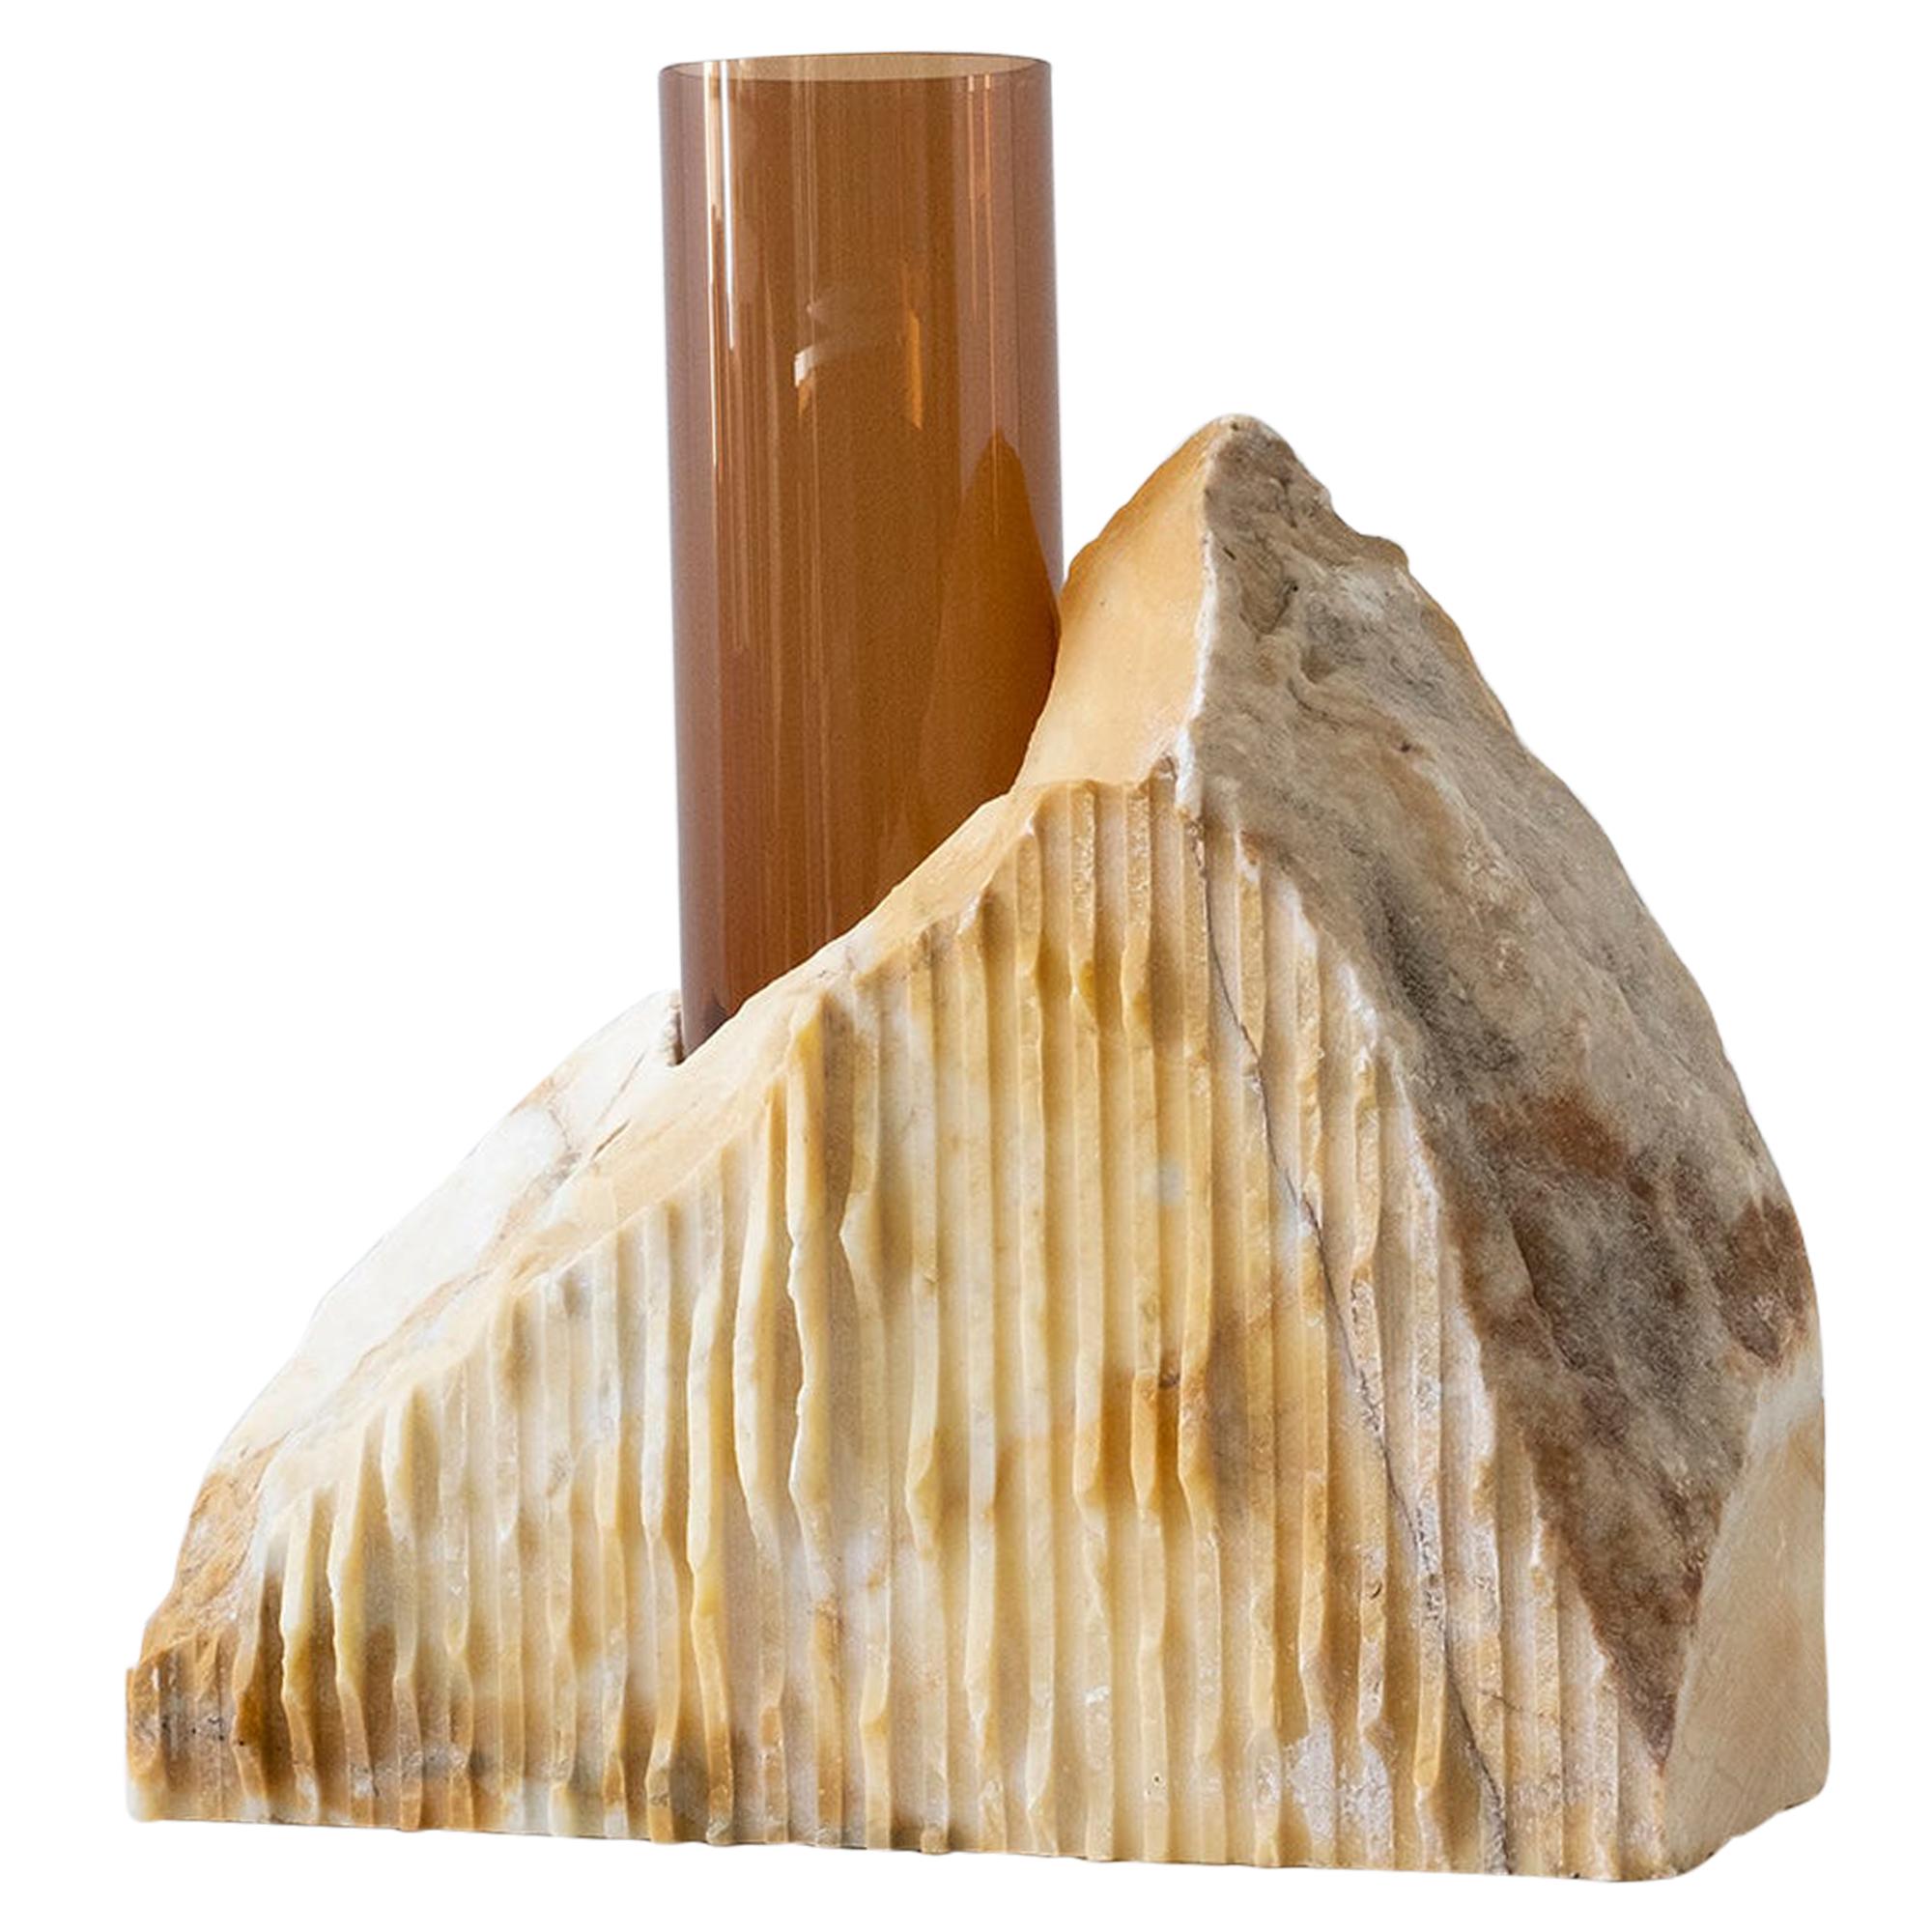 Contemporary Vase, Giallo Siena Marble Brown Glass Cylinder, by Erik Olovsson